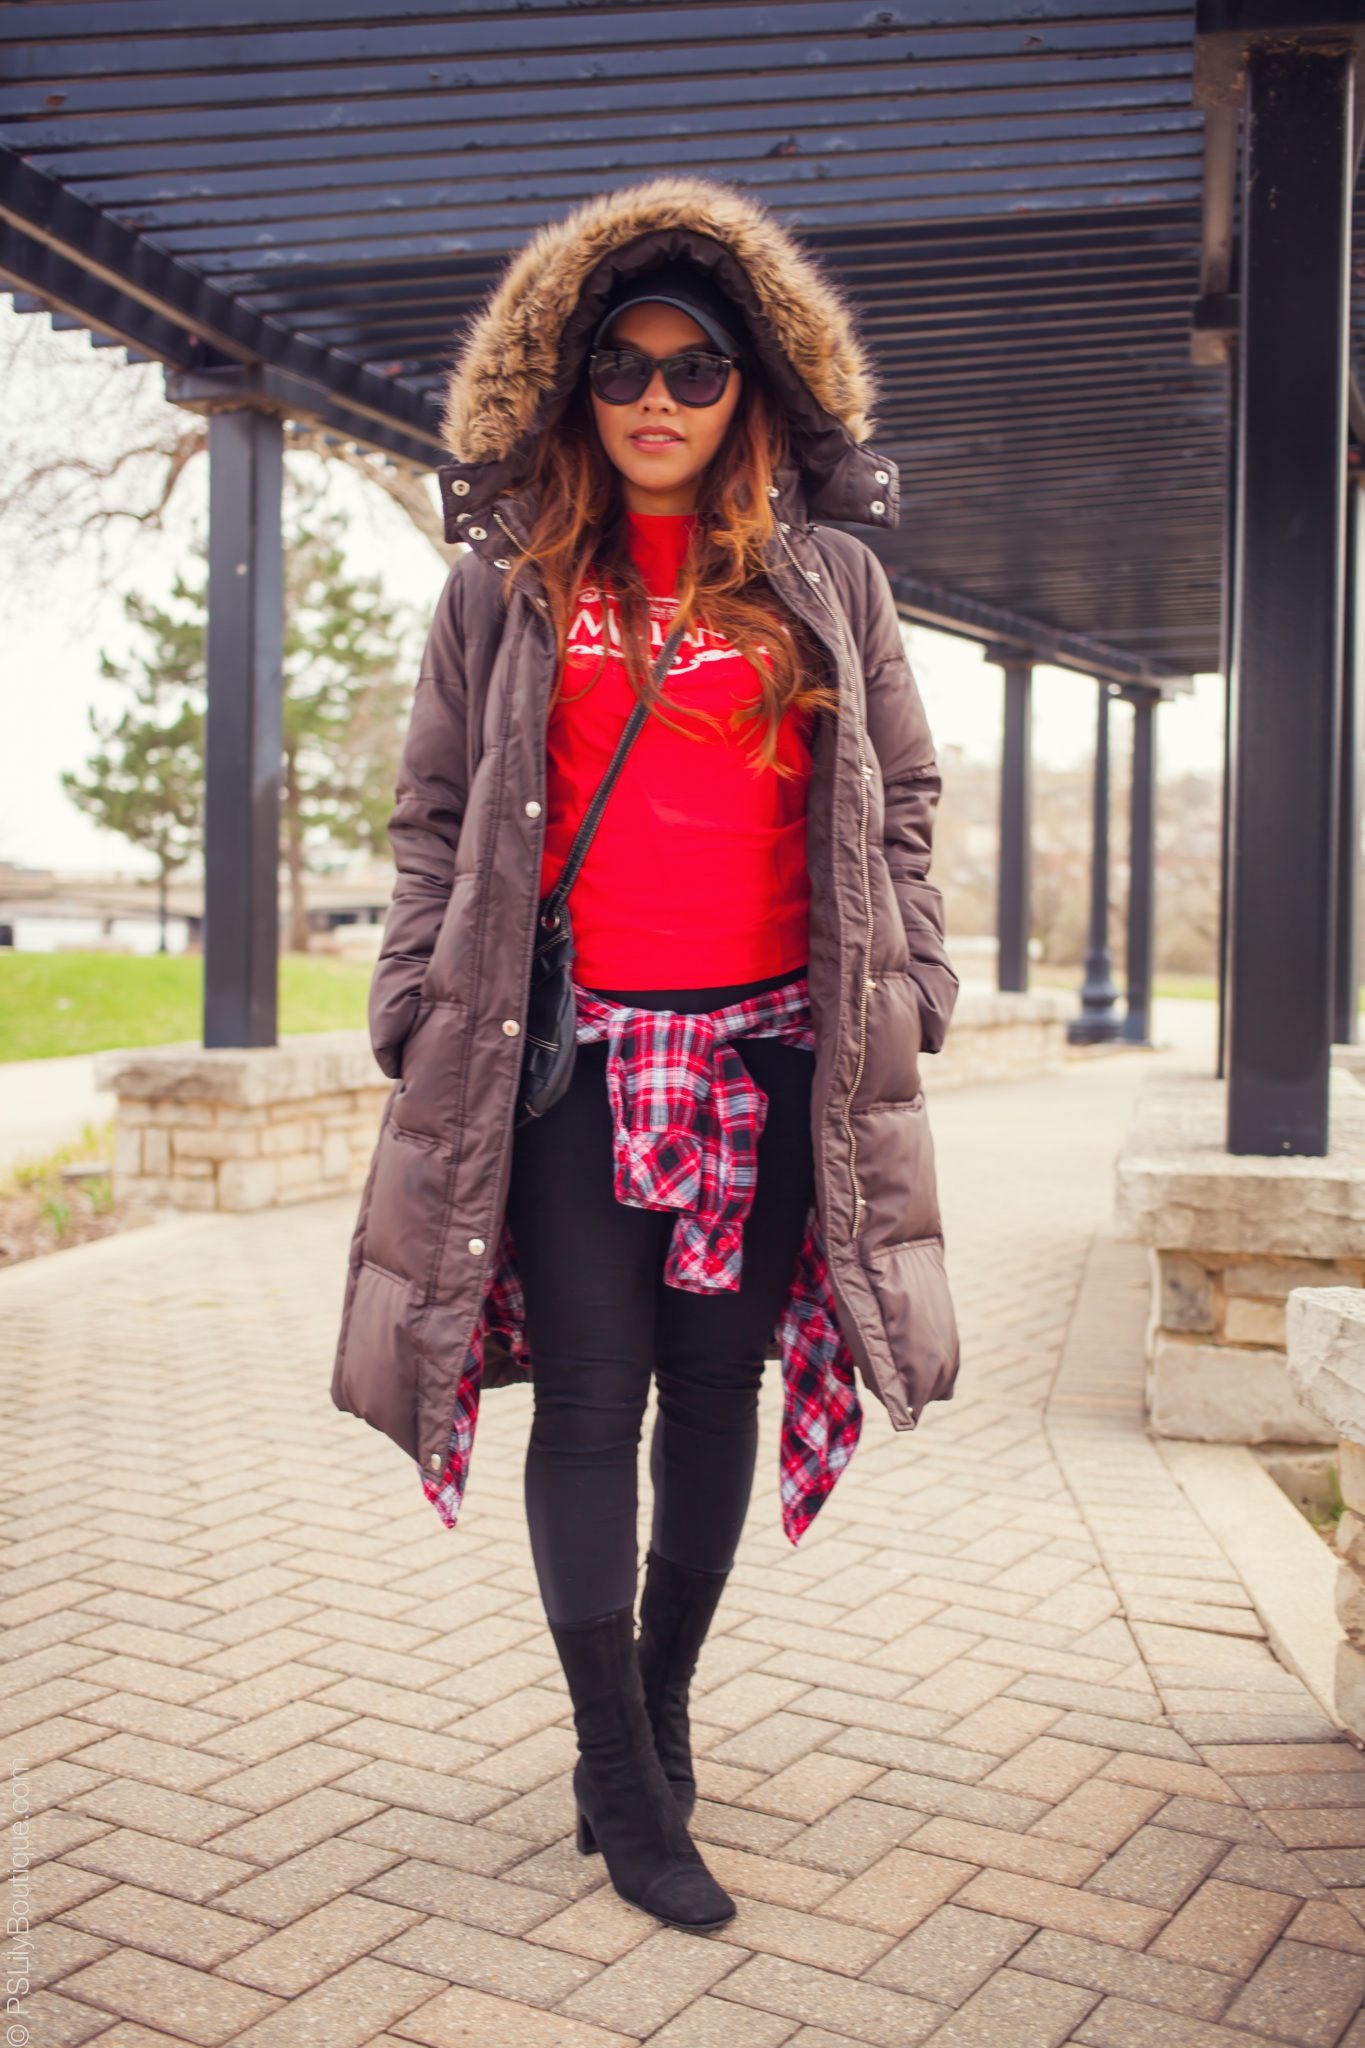 instagram-pslilyboutique-la-fashion-blogger-red-plaid-flannel-shirt-black-betsey-johnson-sunglasses-boho-outfit-of-the-day-4-6-16